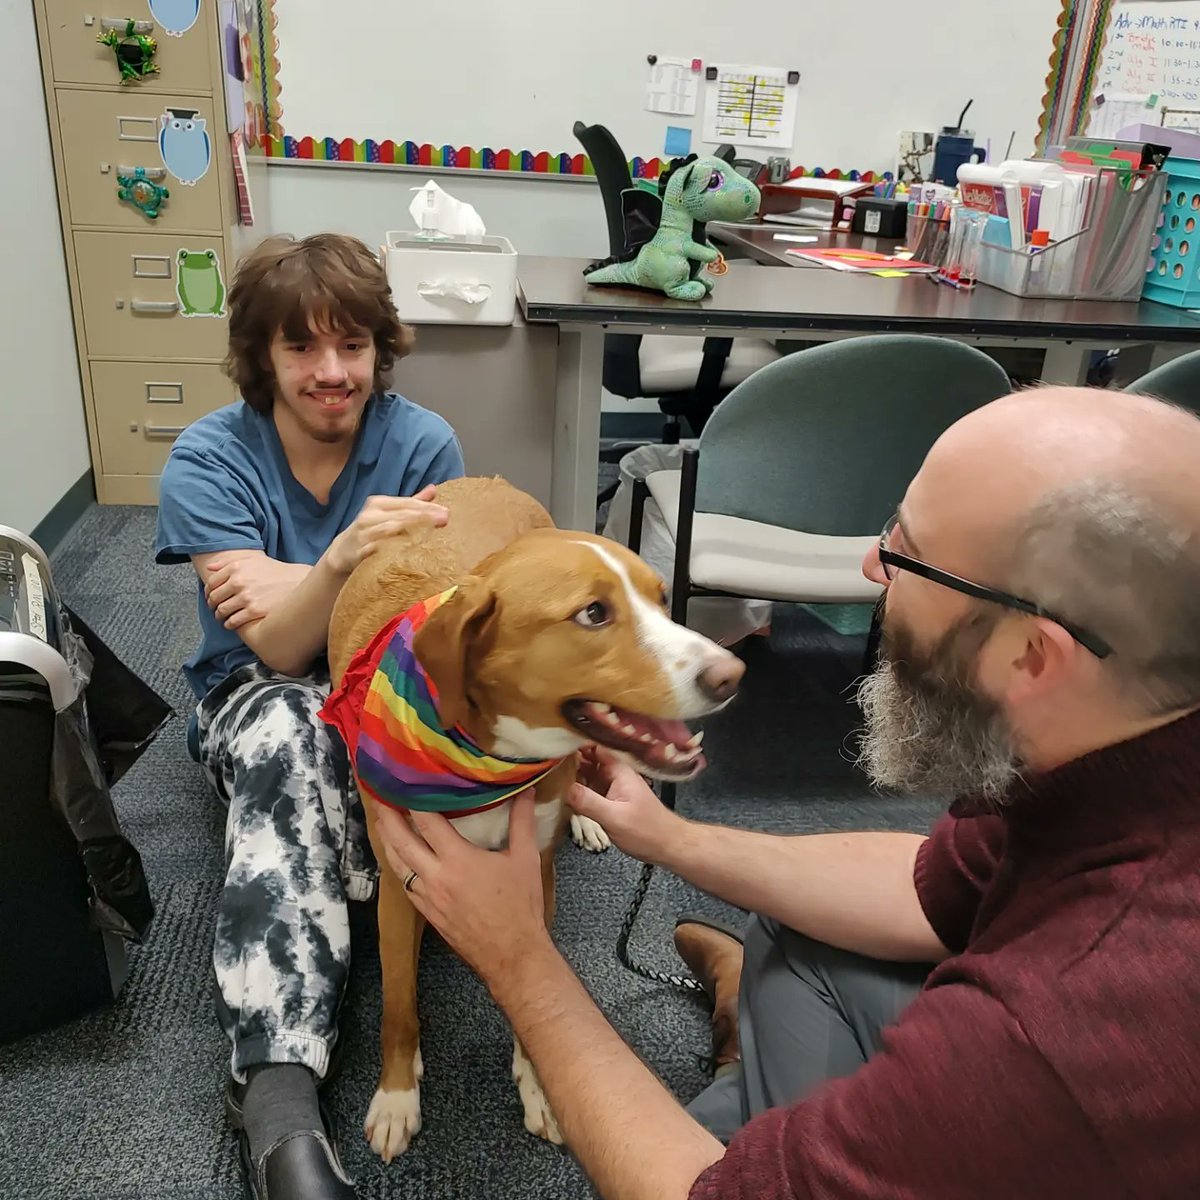 CMA got a welcome visit from Willow, Mr. Allen's emotional support dog.